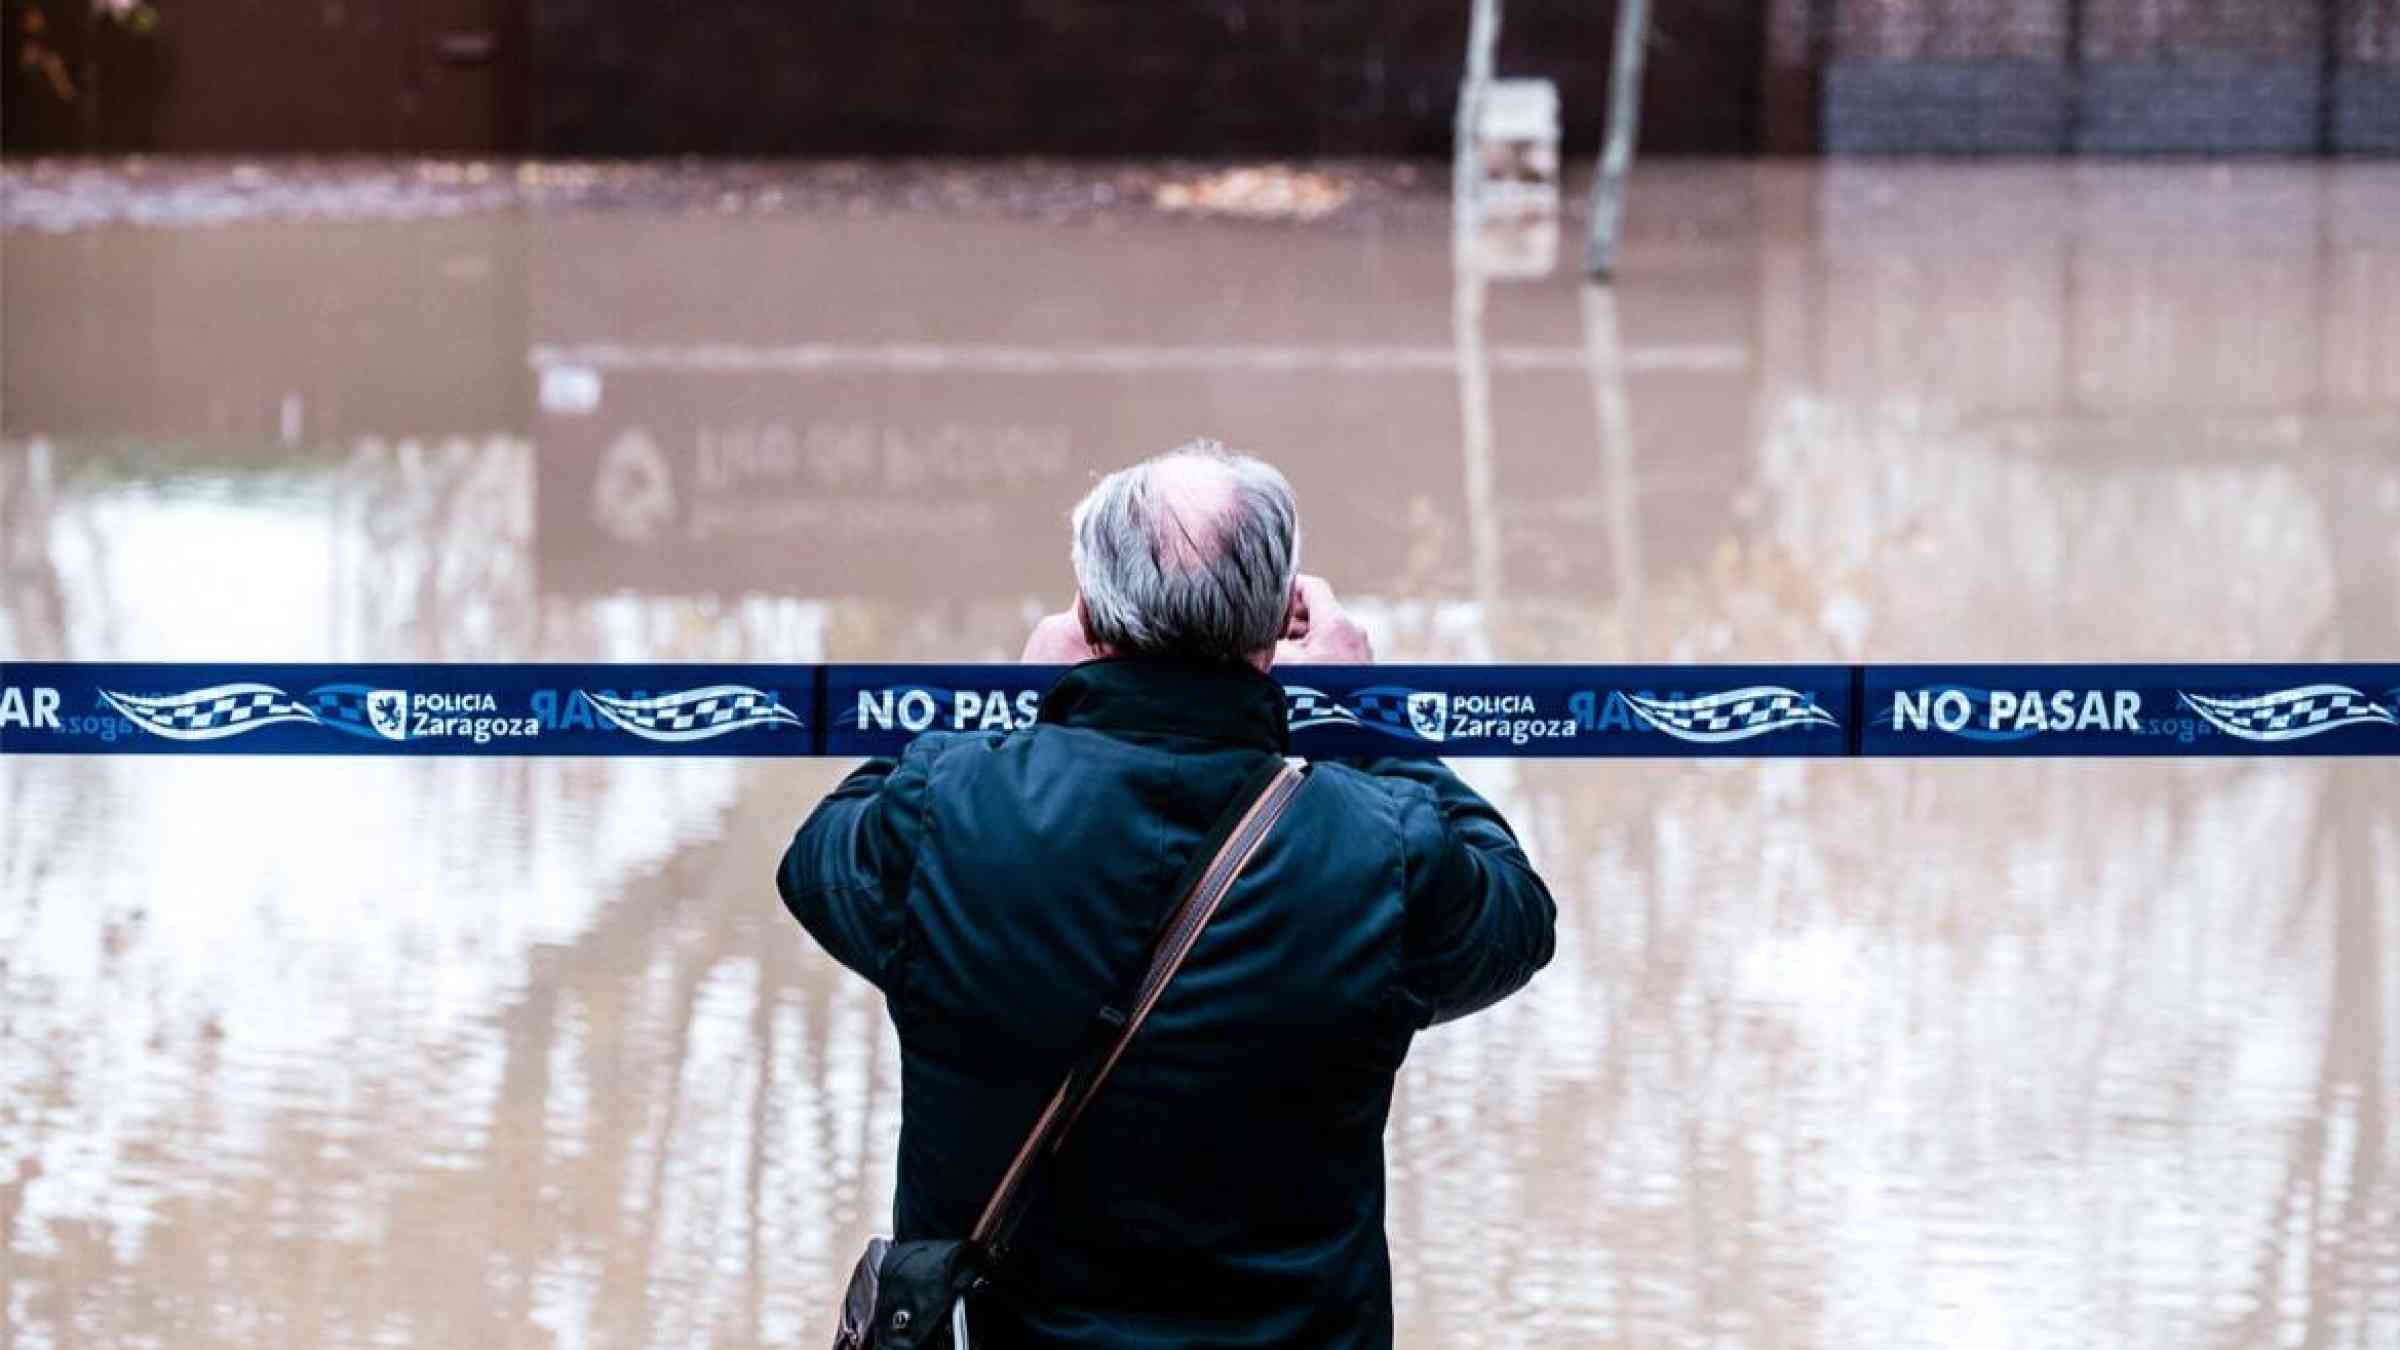 A bystander takes a photo of floods in Zaragoza, Spain